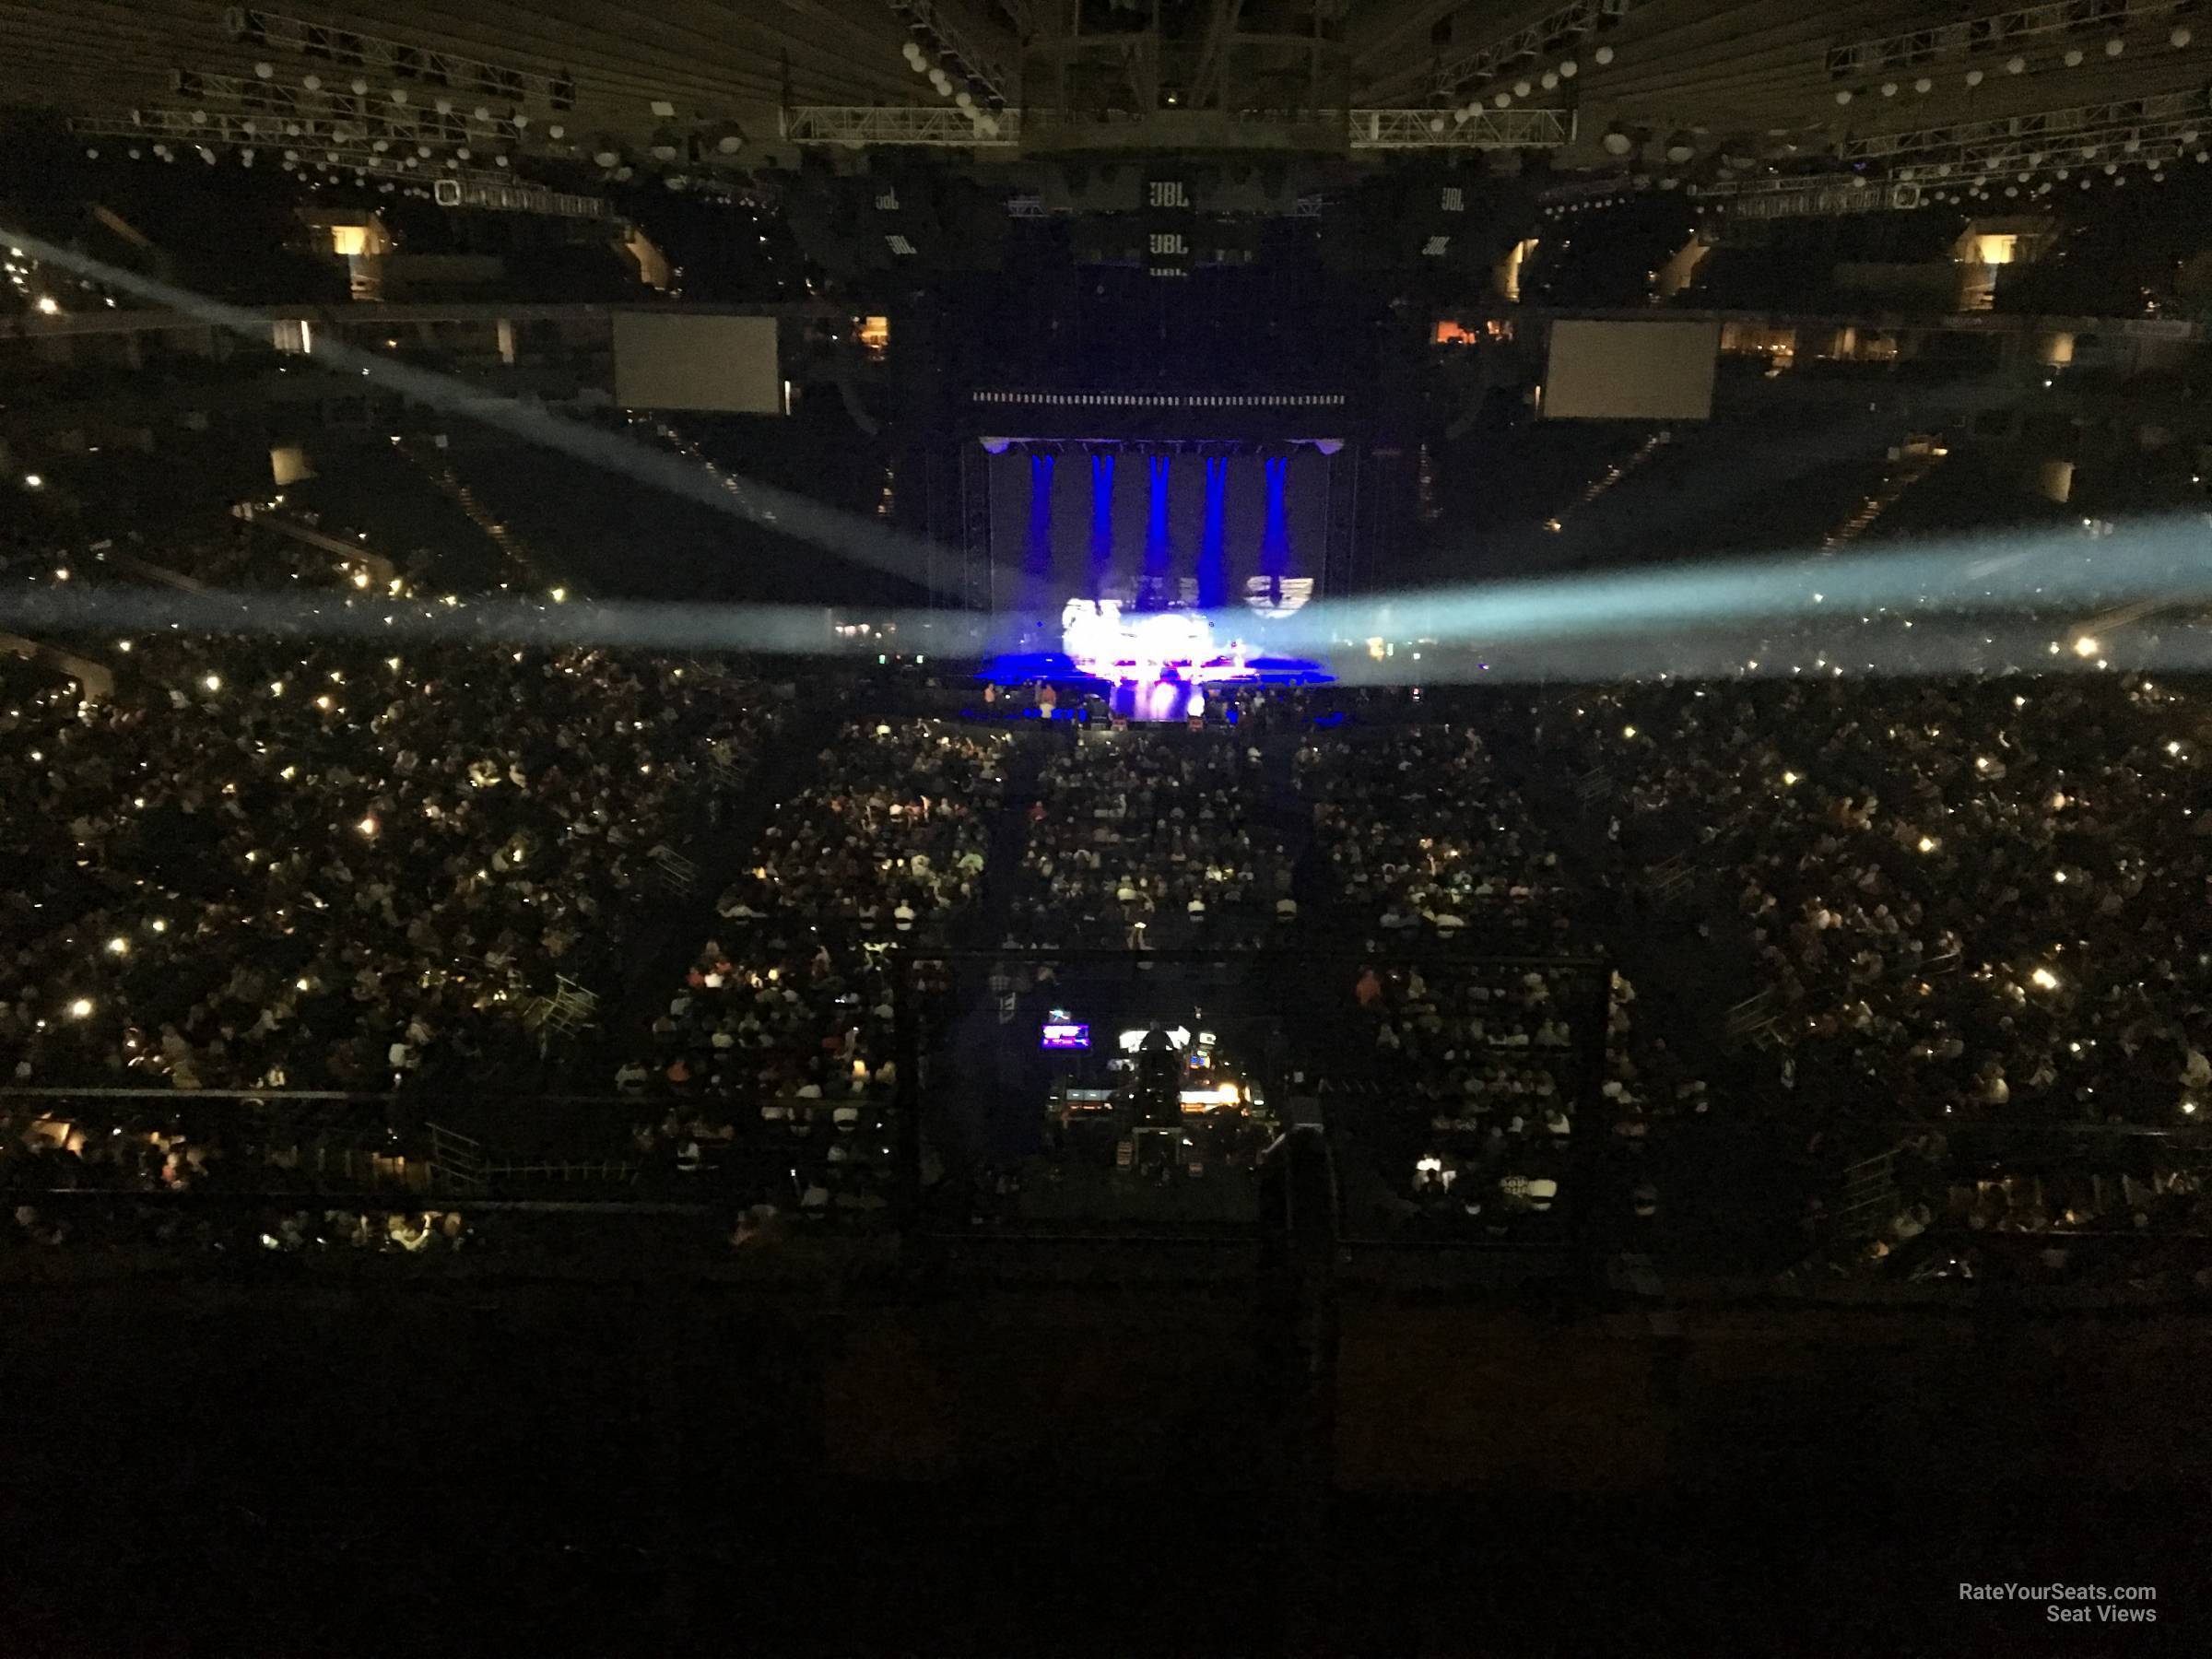 section 209, row 3 seat view  - oakland arena